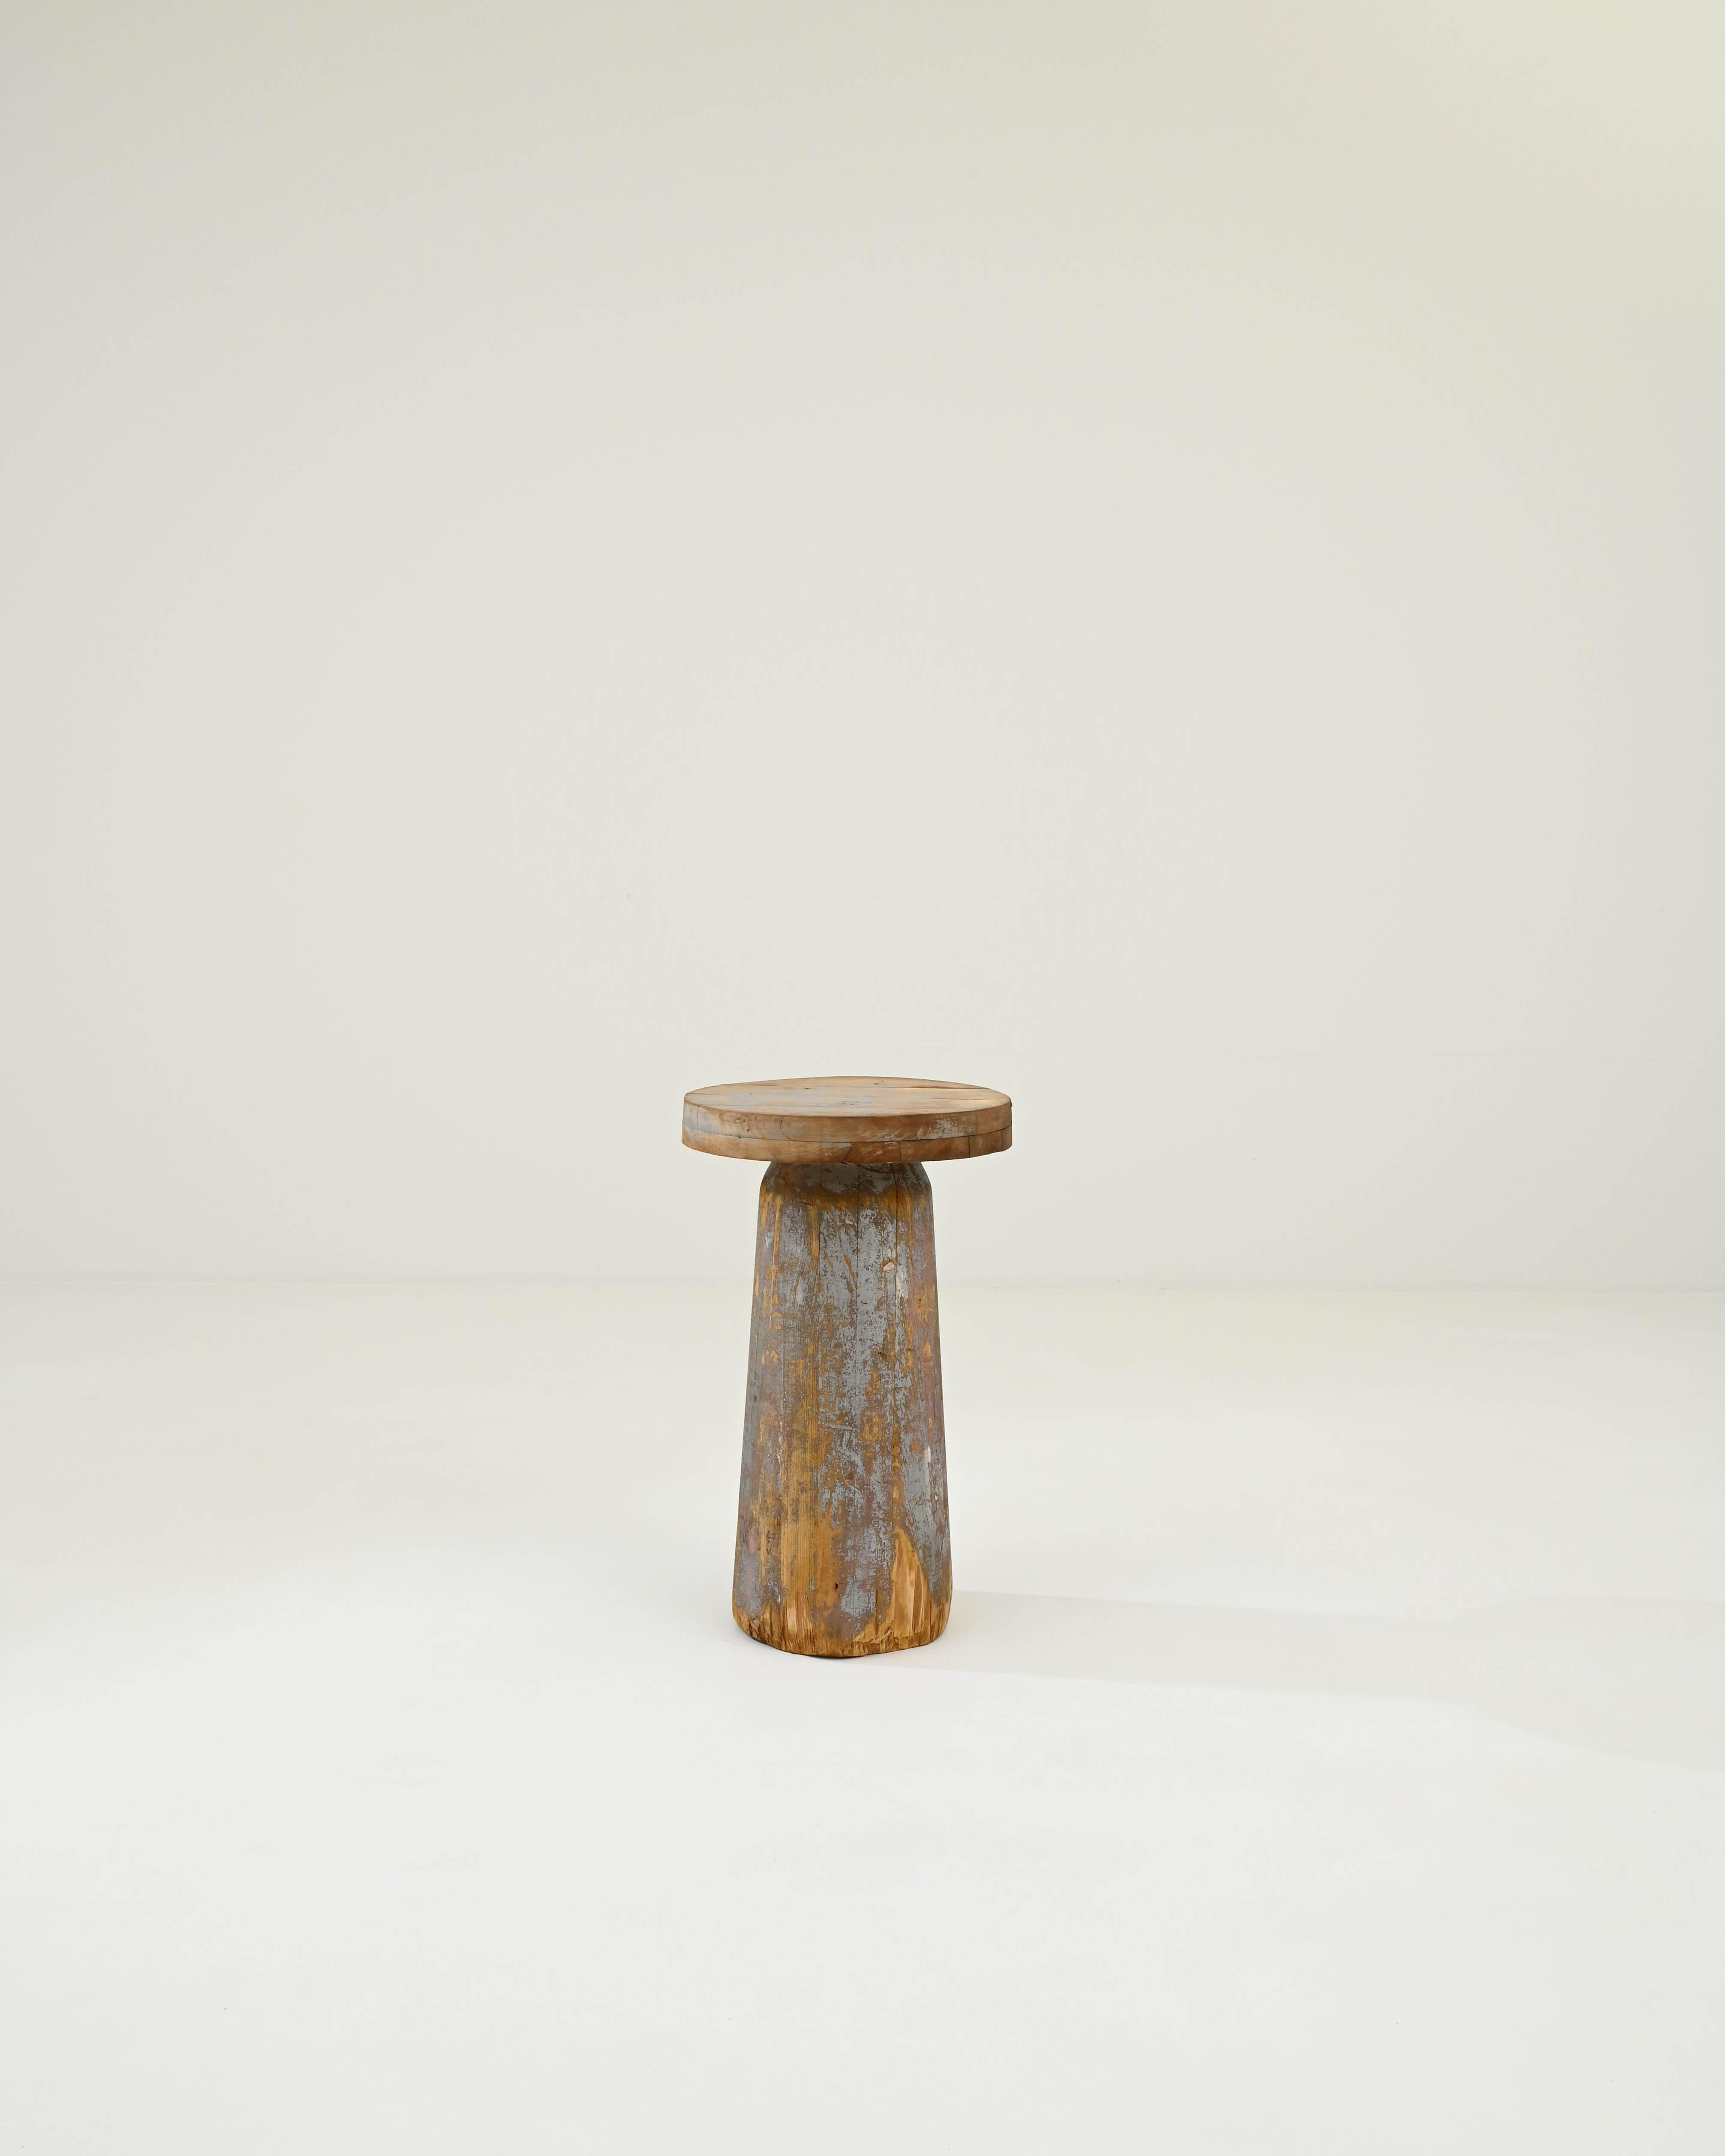 20th Century Czech Wooden Stool In Good Condition For Sale In High Point, NC